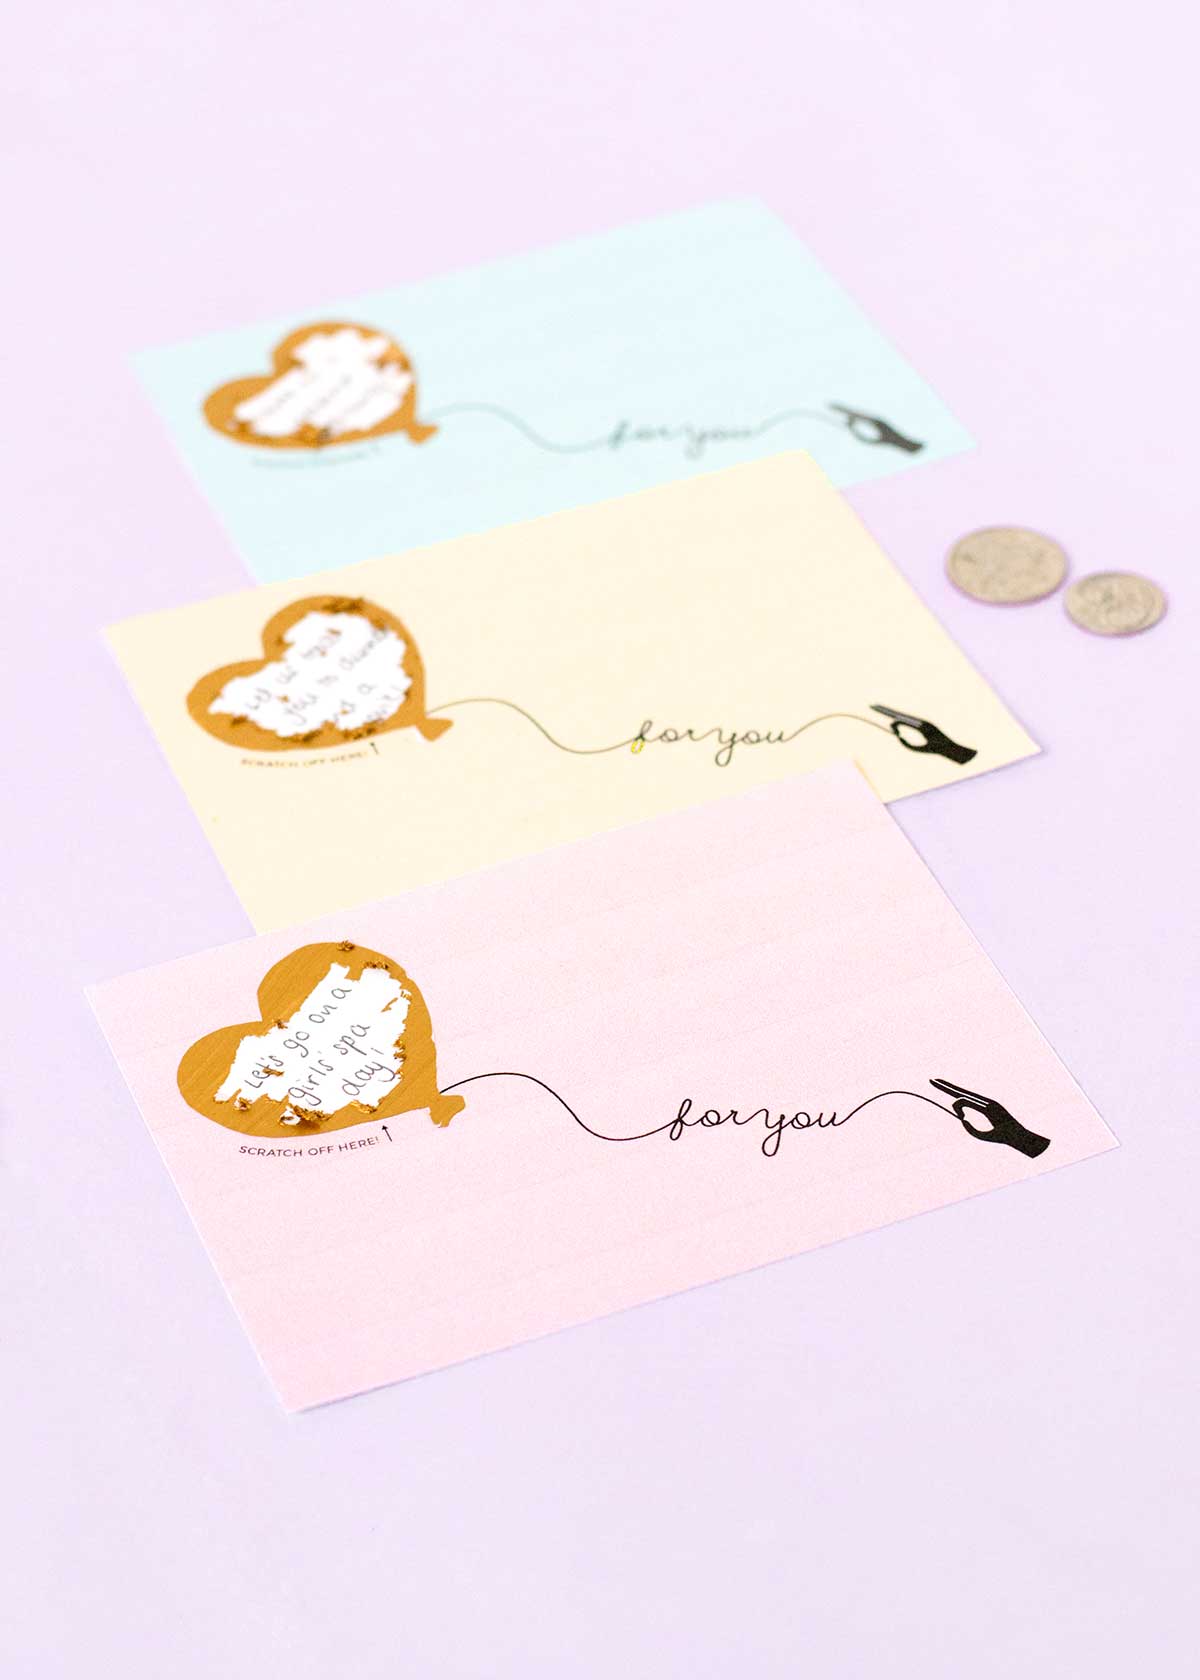 Heart balloon scratch off greeting card DIY - with free printable!